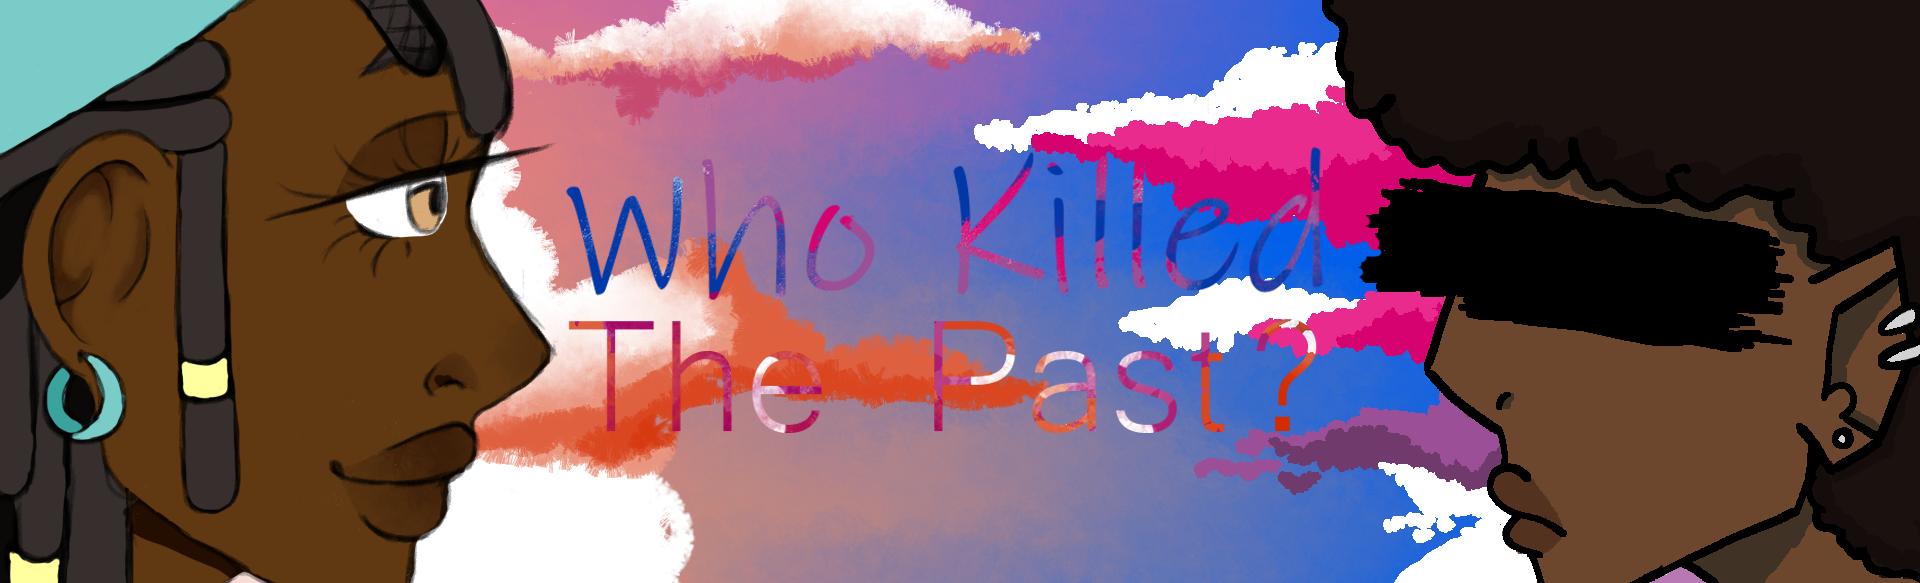 Who killed the past?